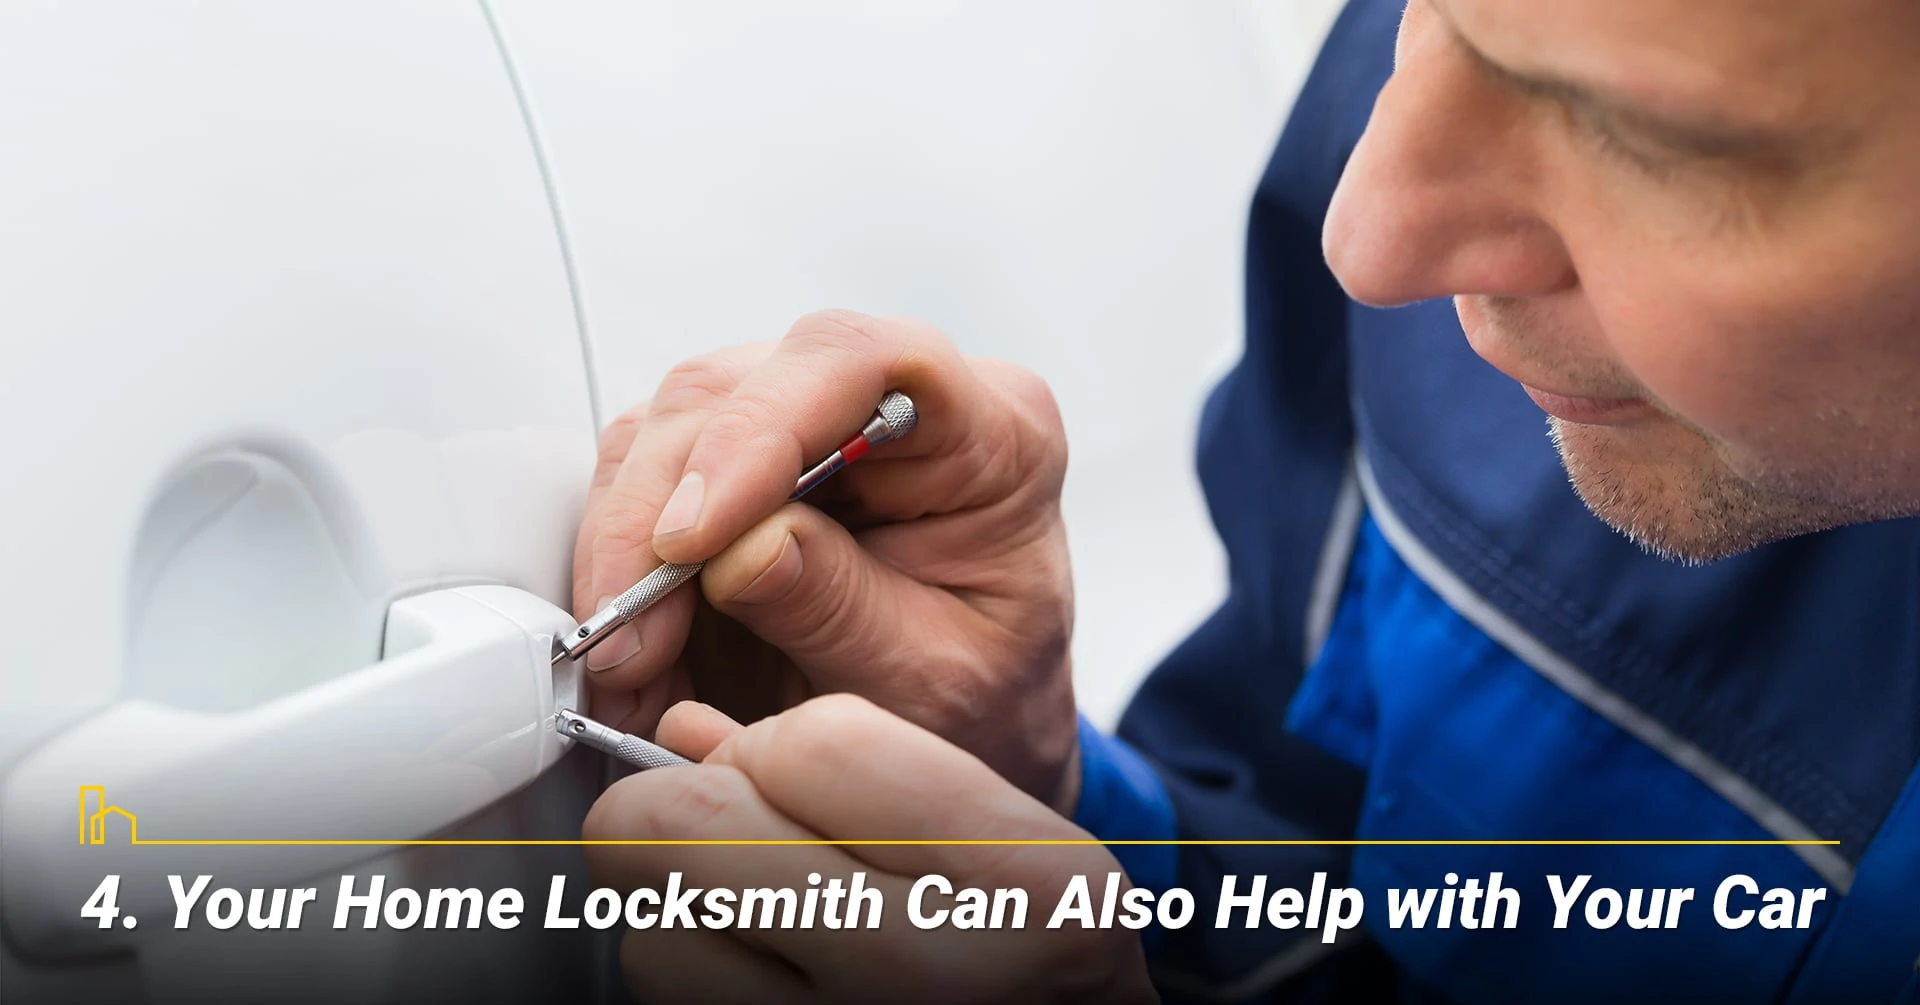 Your Home Locksmith Can Also Help with Your Car, they can help you get in your car